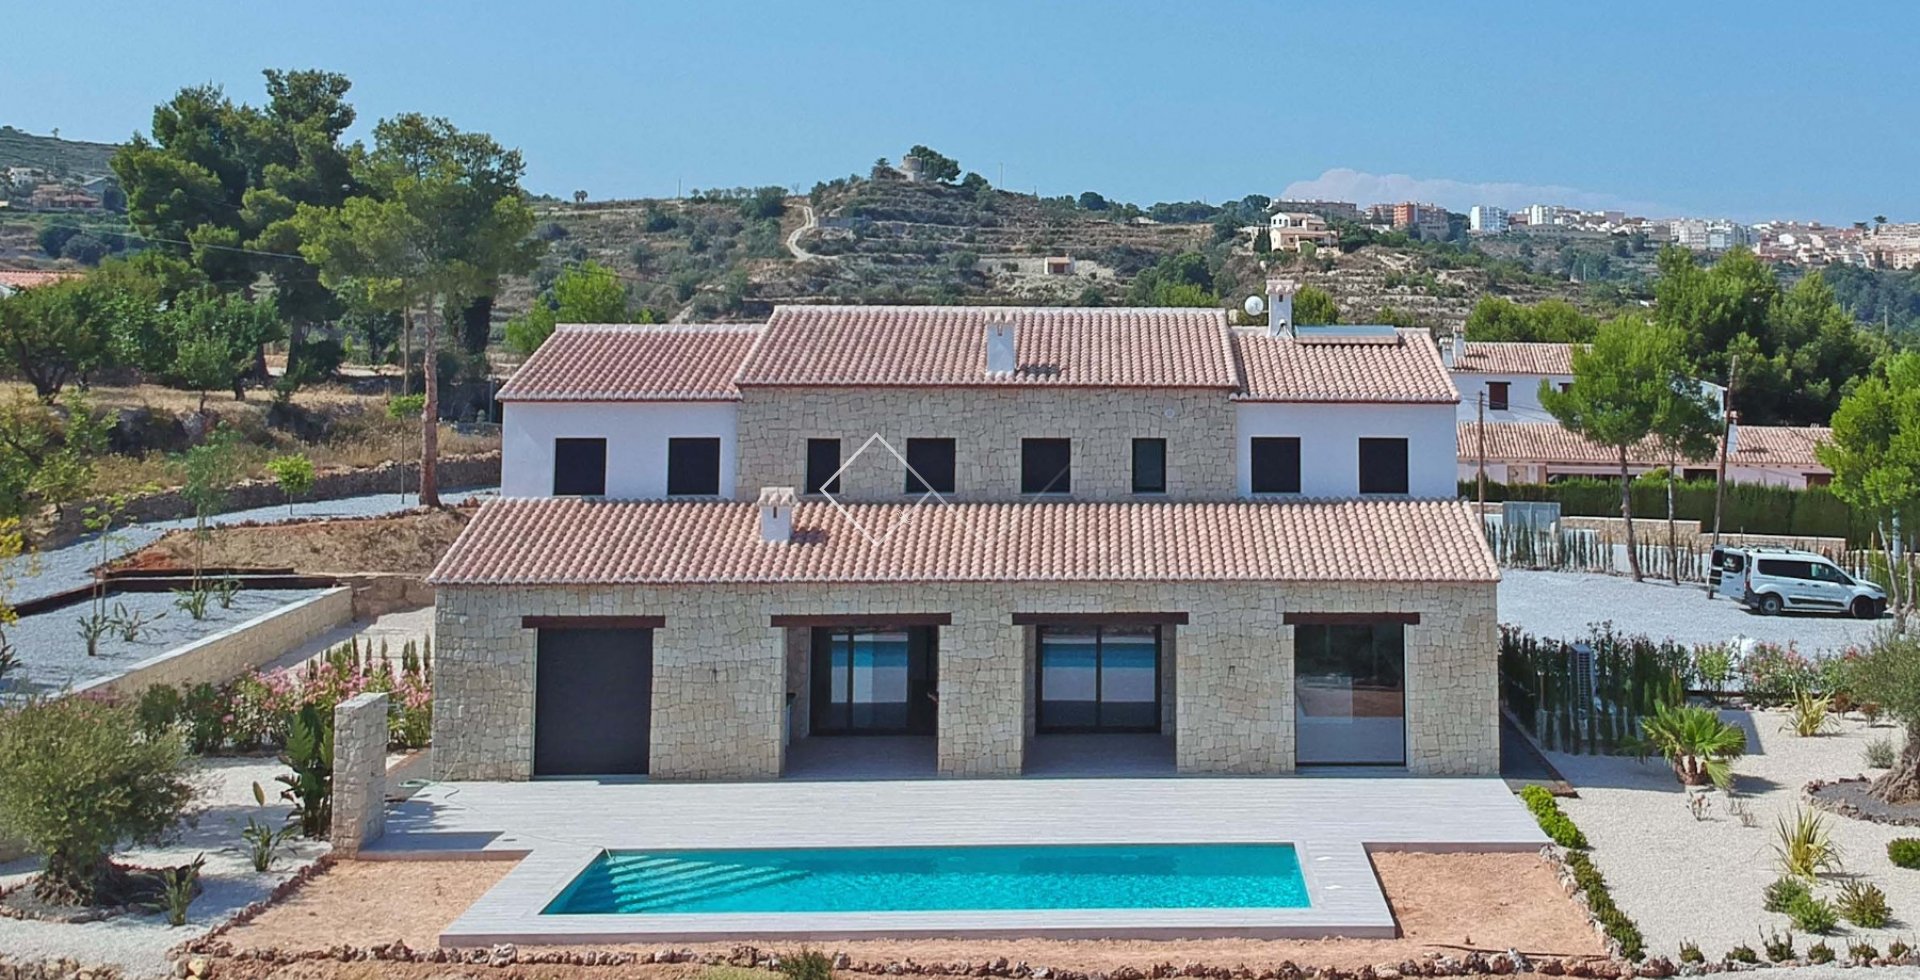 Large finca with pool and garden - New build finca style villa with stunning sea views for sale in Benissa